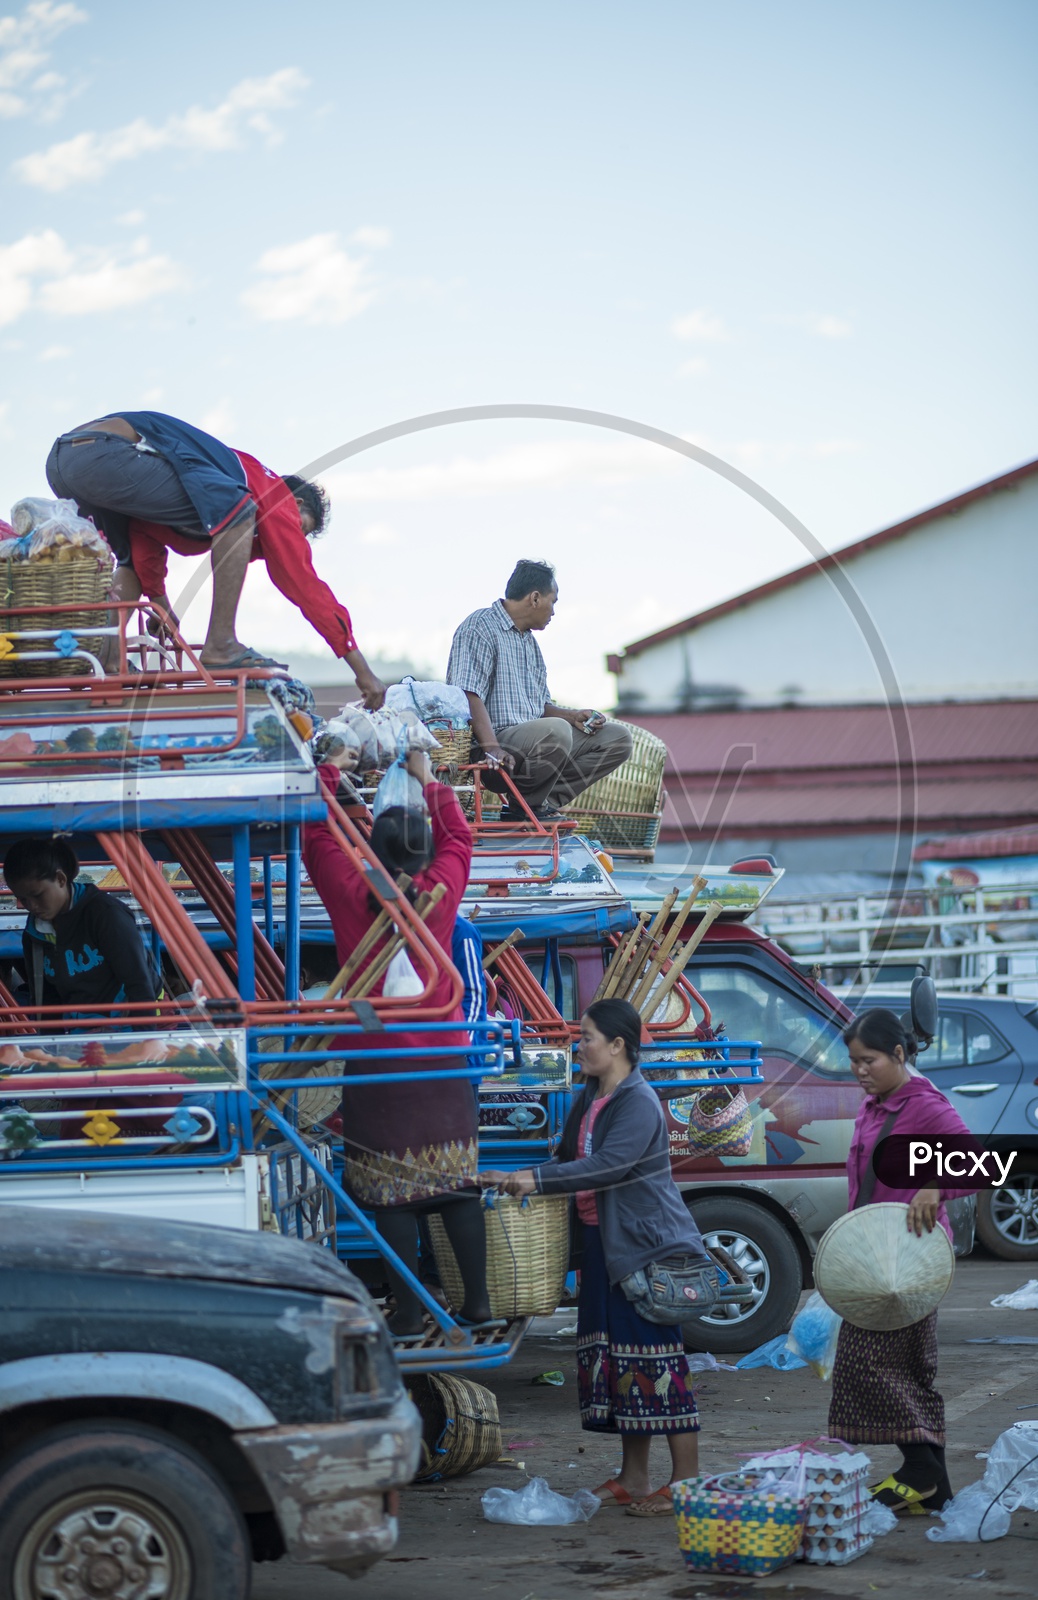 Local People loading Fishes into Vehicles